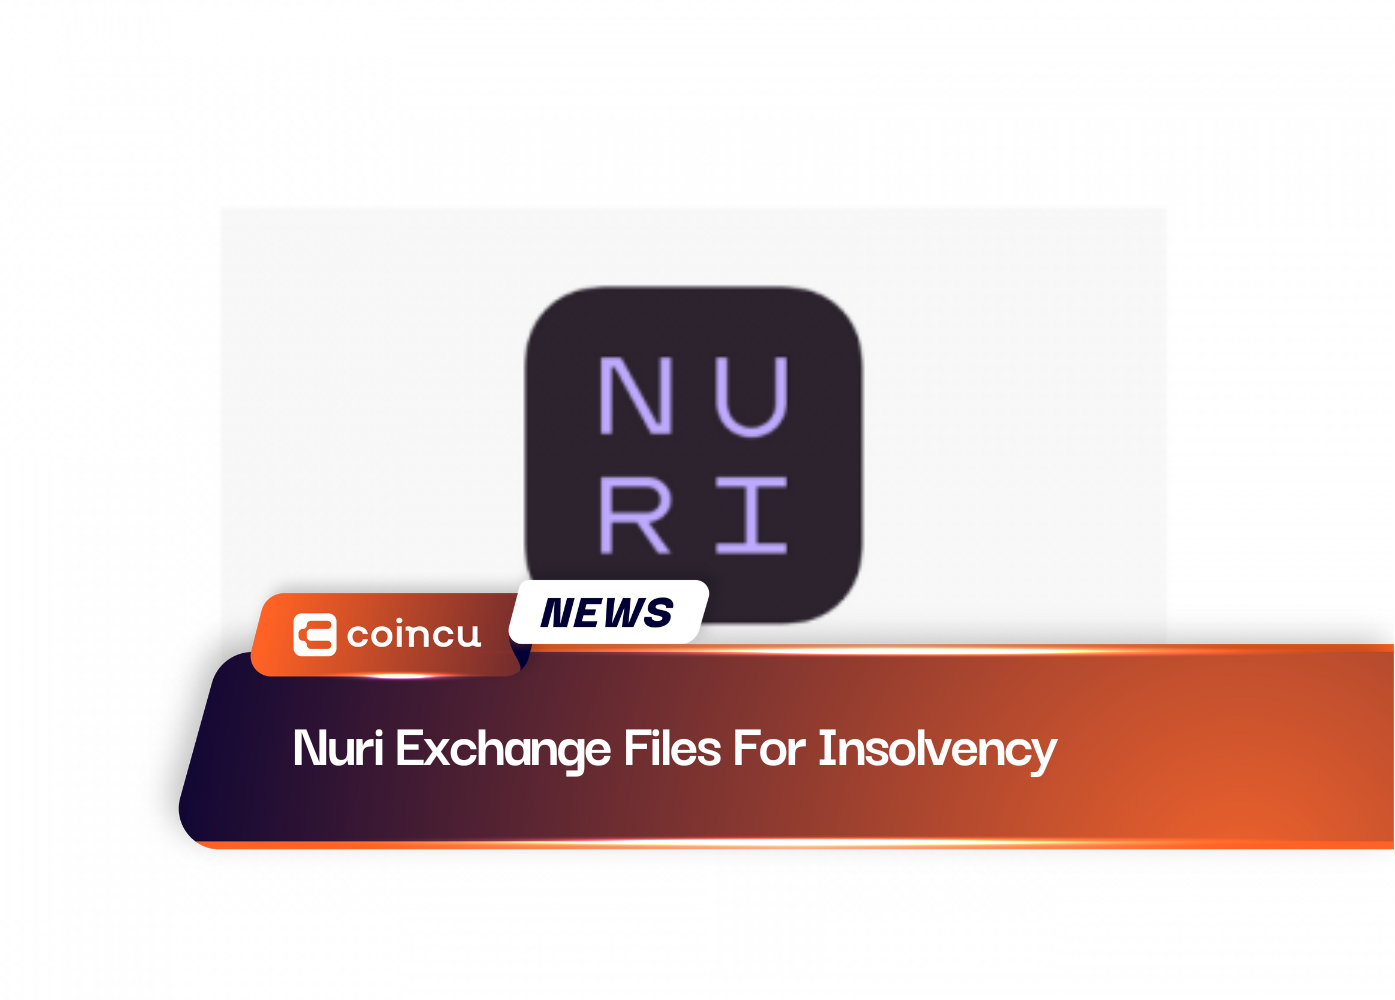 Nuri Exchange Files For Insolvency